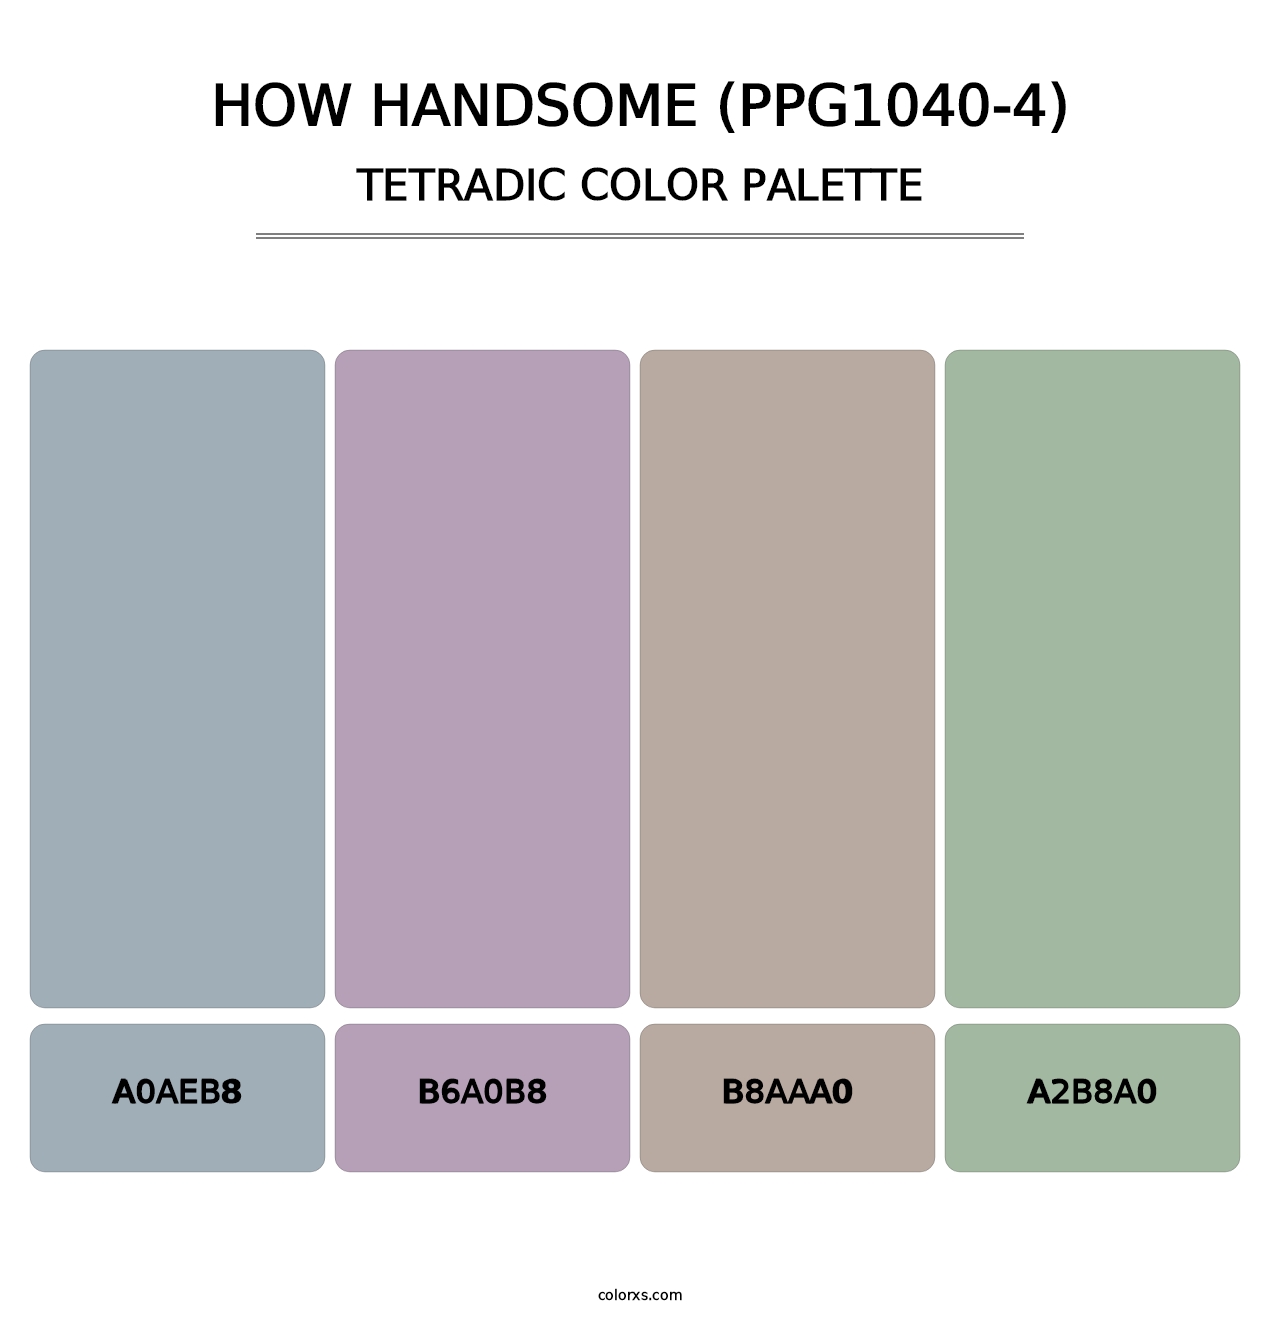 How Handsome (PPG1040-4) - Tetradic Color Palette